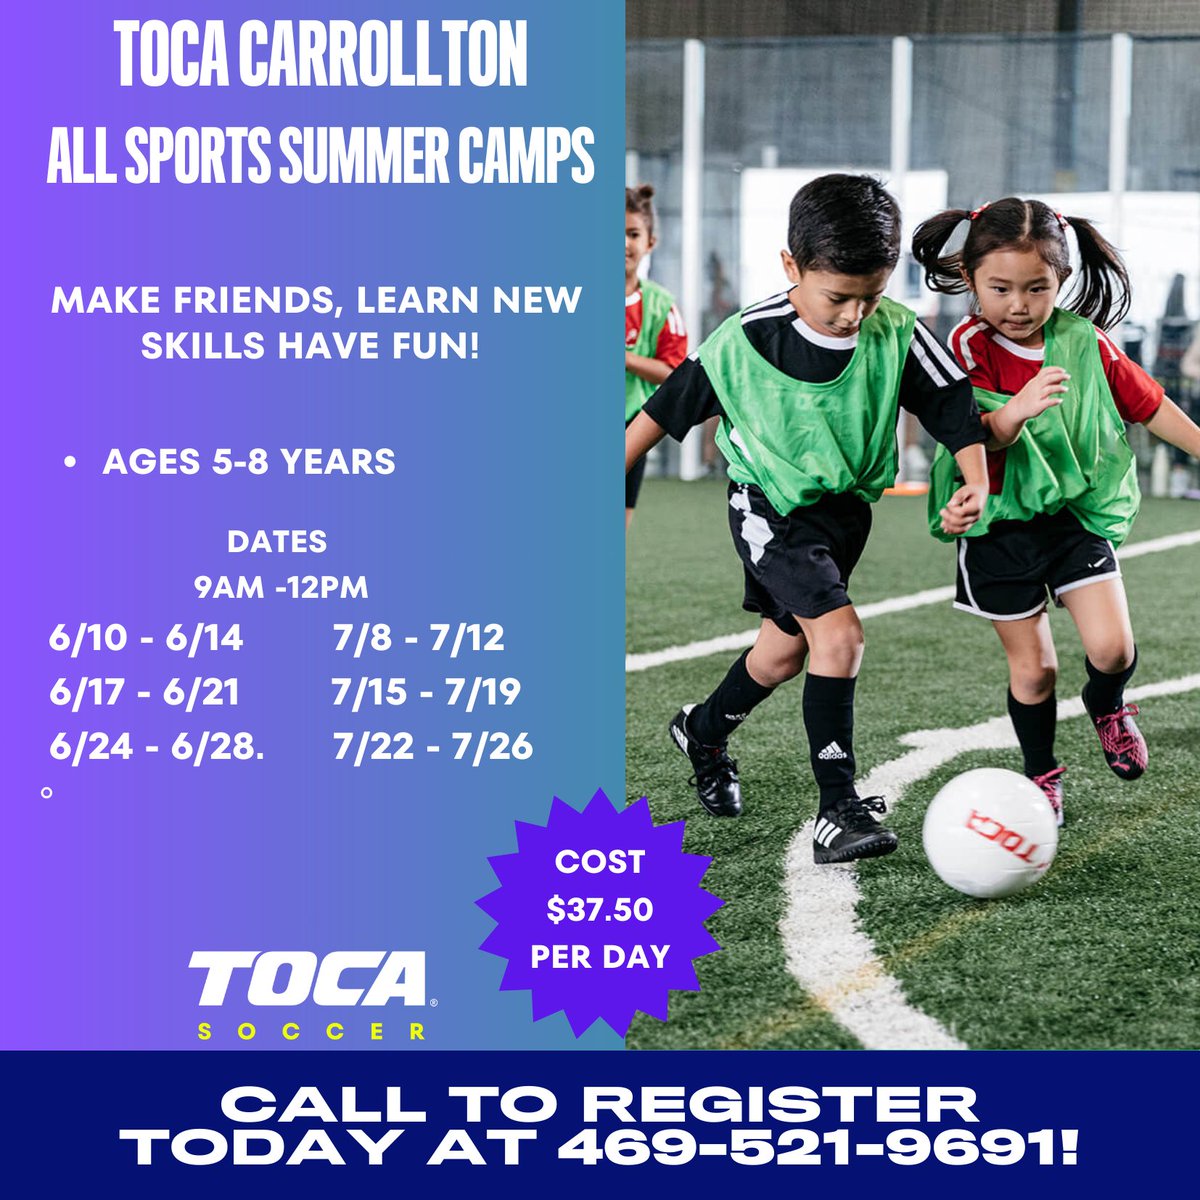 TOCA Carrollton Summer Camps!!! Don't miss out on the fun! Registration is now open!!!